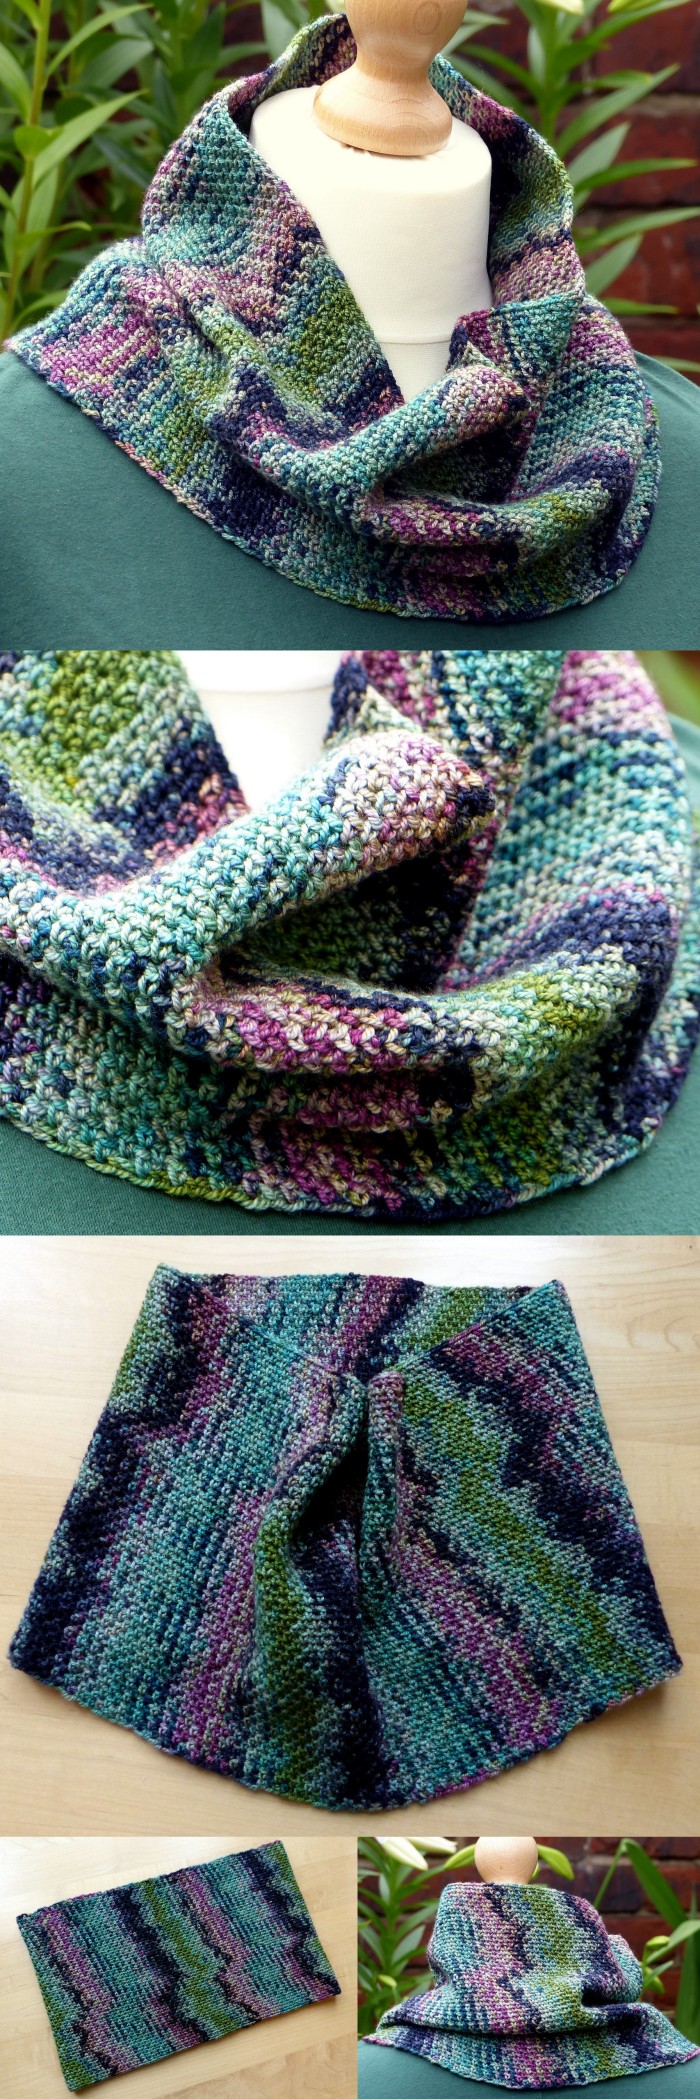 Colour Pool Cowl - Free Crochet Pattern from Make My Day Creative specifically for short colour variegated yarn